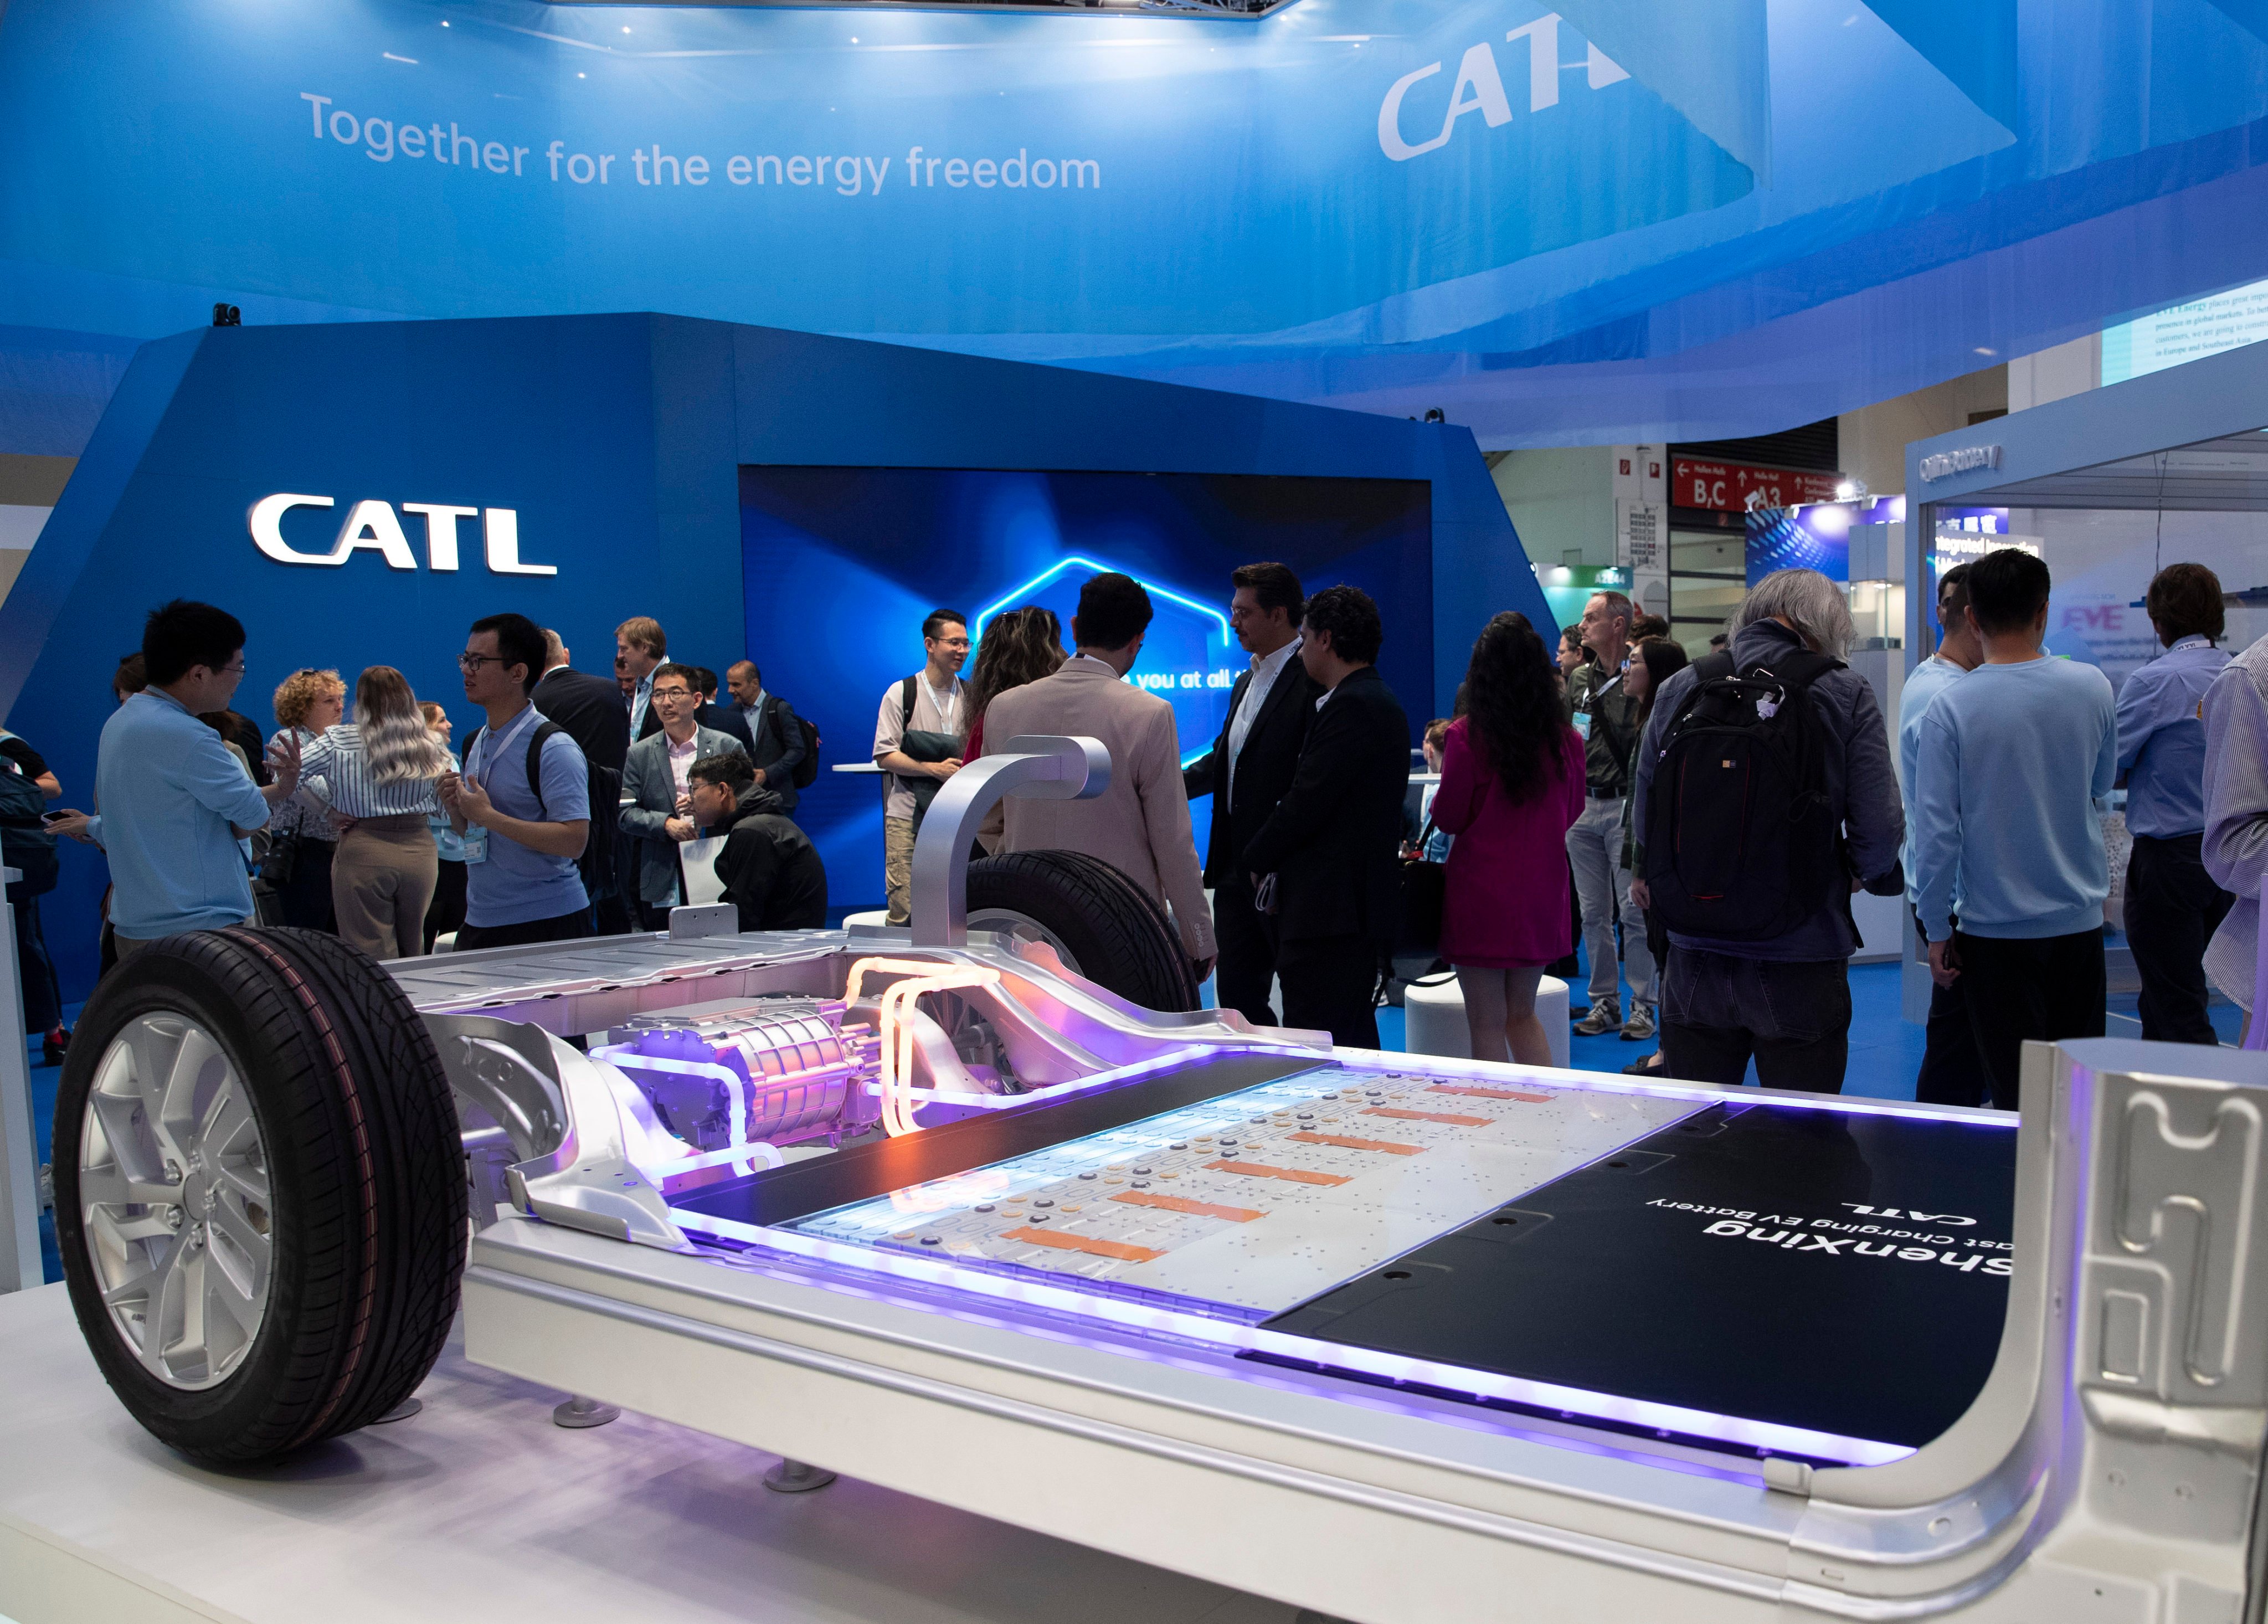 CATL supplies batteries to almost every major carmaker, including Tesla, Volkswagen and Toyota. Photo: Xinhua